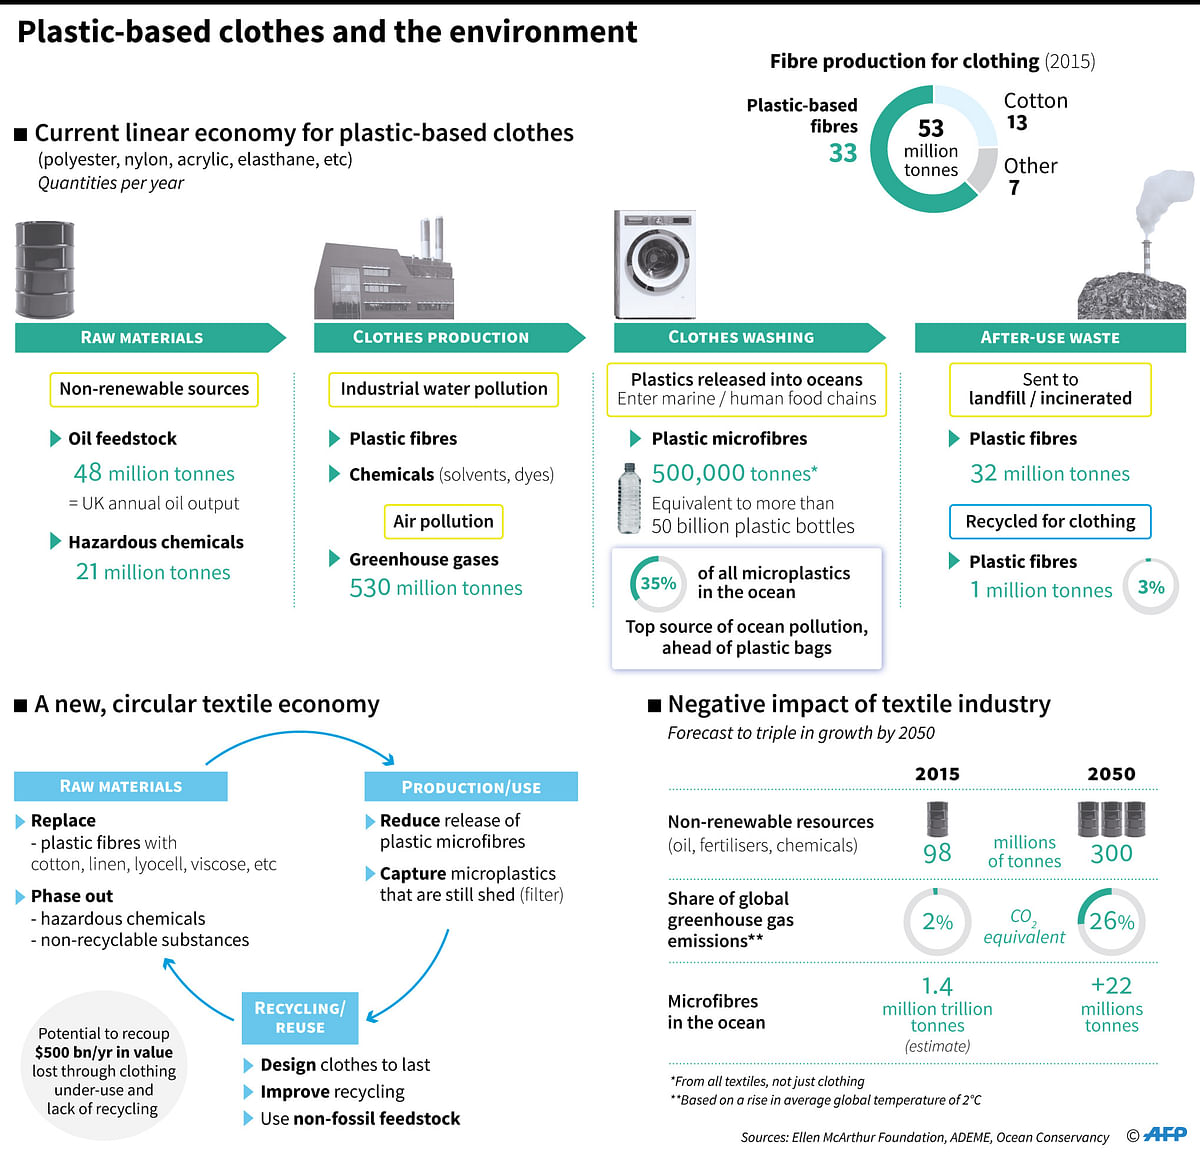 Description of the current linear economy for plastic-based clothes and its detrimental effect on the environment, especially plastic microfibre pollution in the oceans; plus proposals for a more environmentally-friendly clothing industry. Photo: AFP